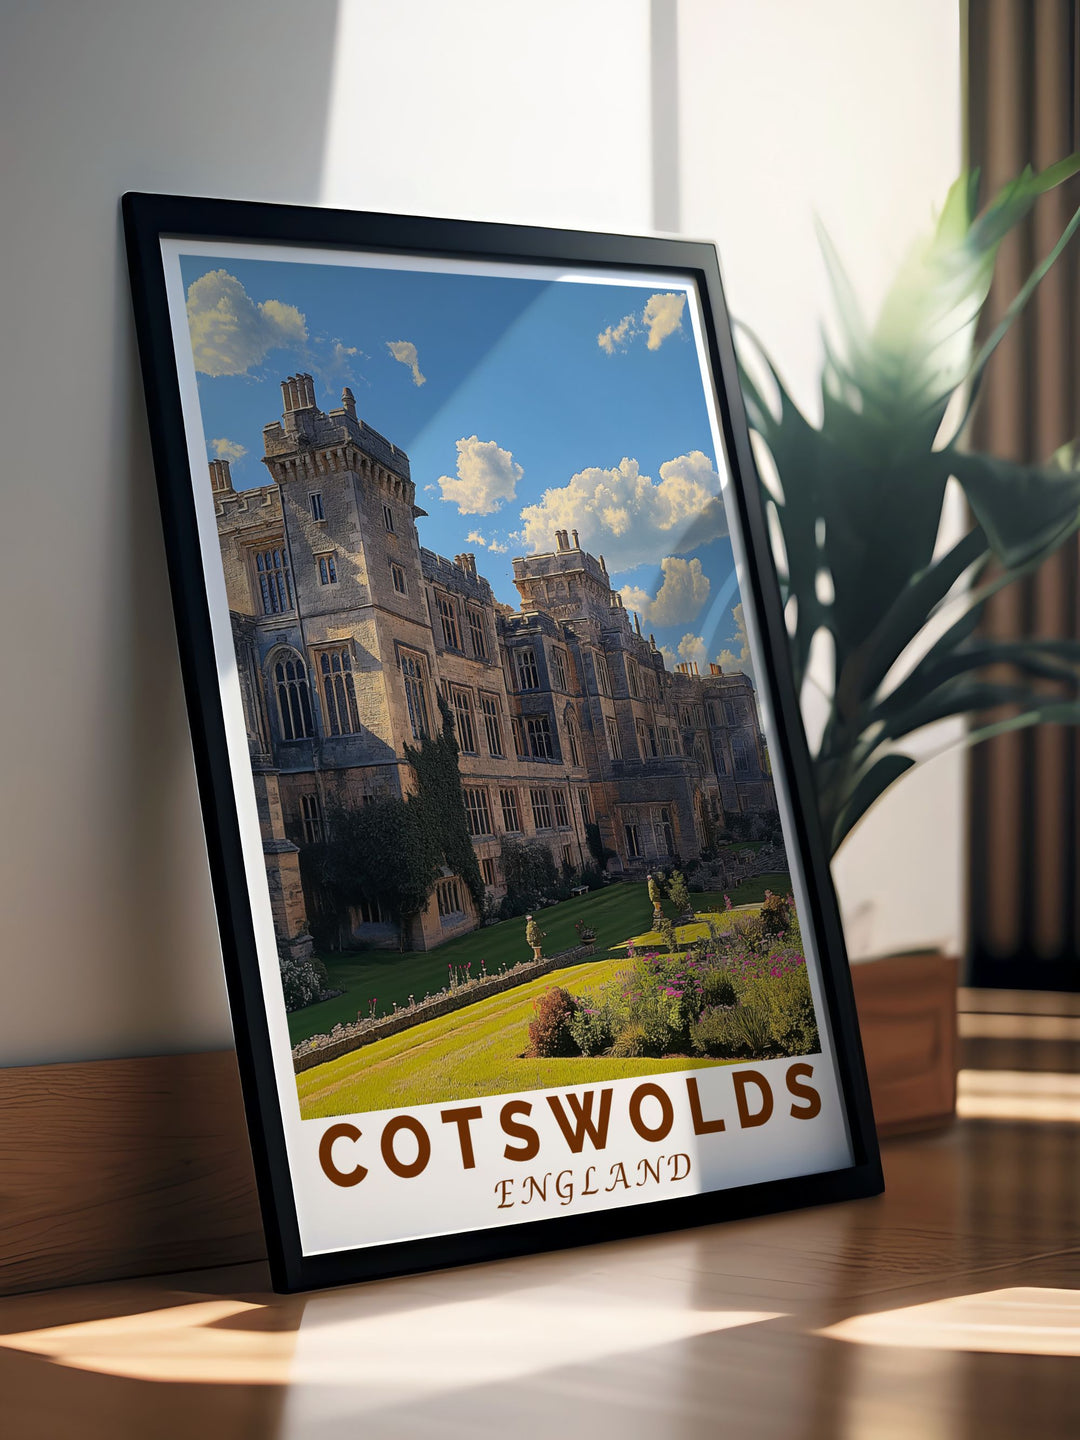 Illustrated with care, this travel poster brings to life the majestic architecture of Sudeley Castle and the vibrant gardens, ideal for enhancing any room with Englands regal splendor.